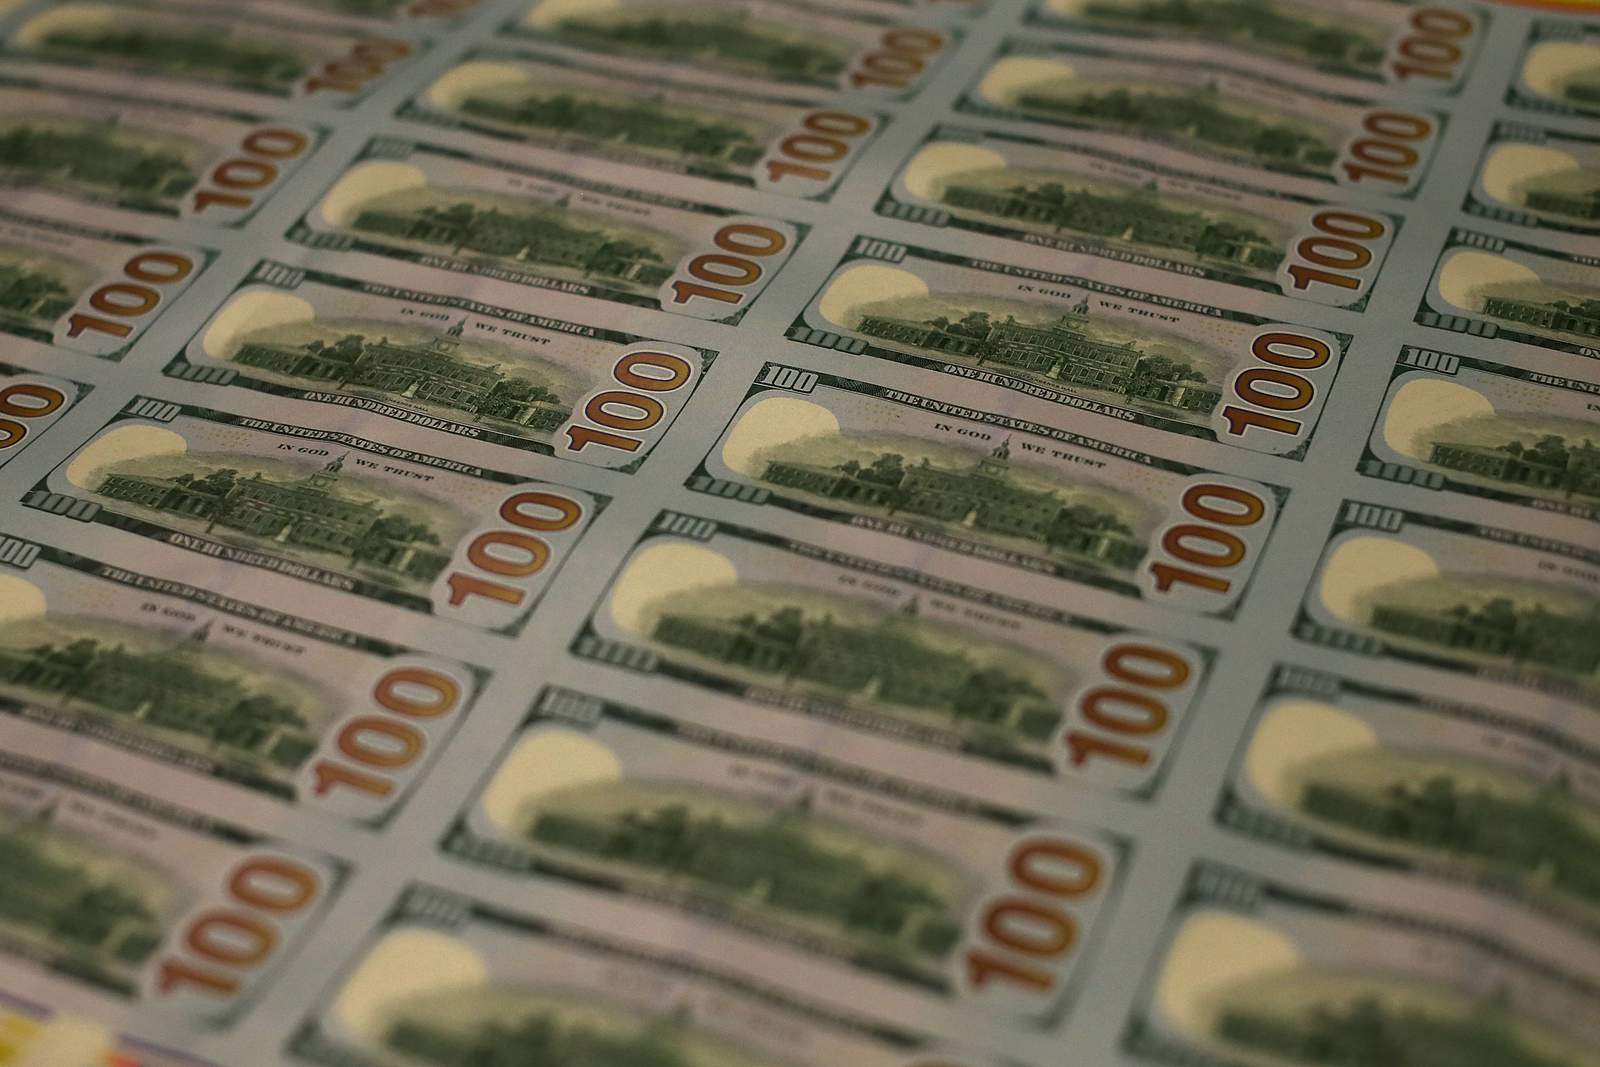 Florida is holding $2 billion in unclaimed money. Check if any of it is yours.